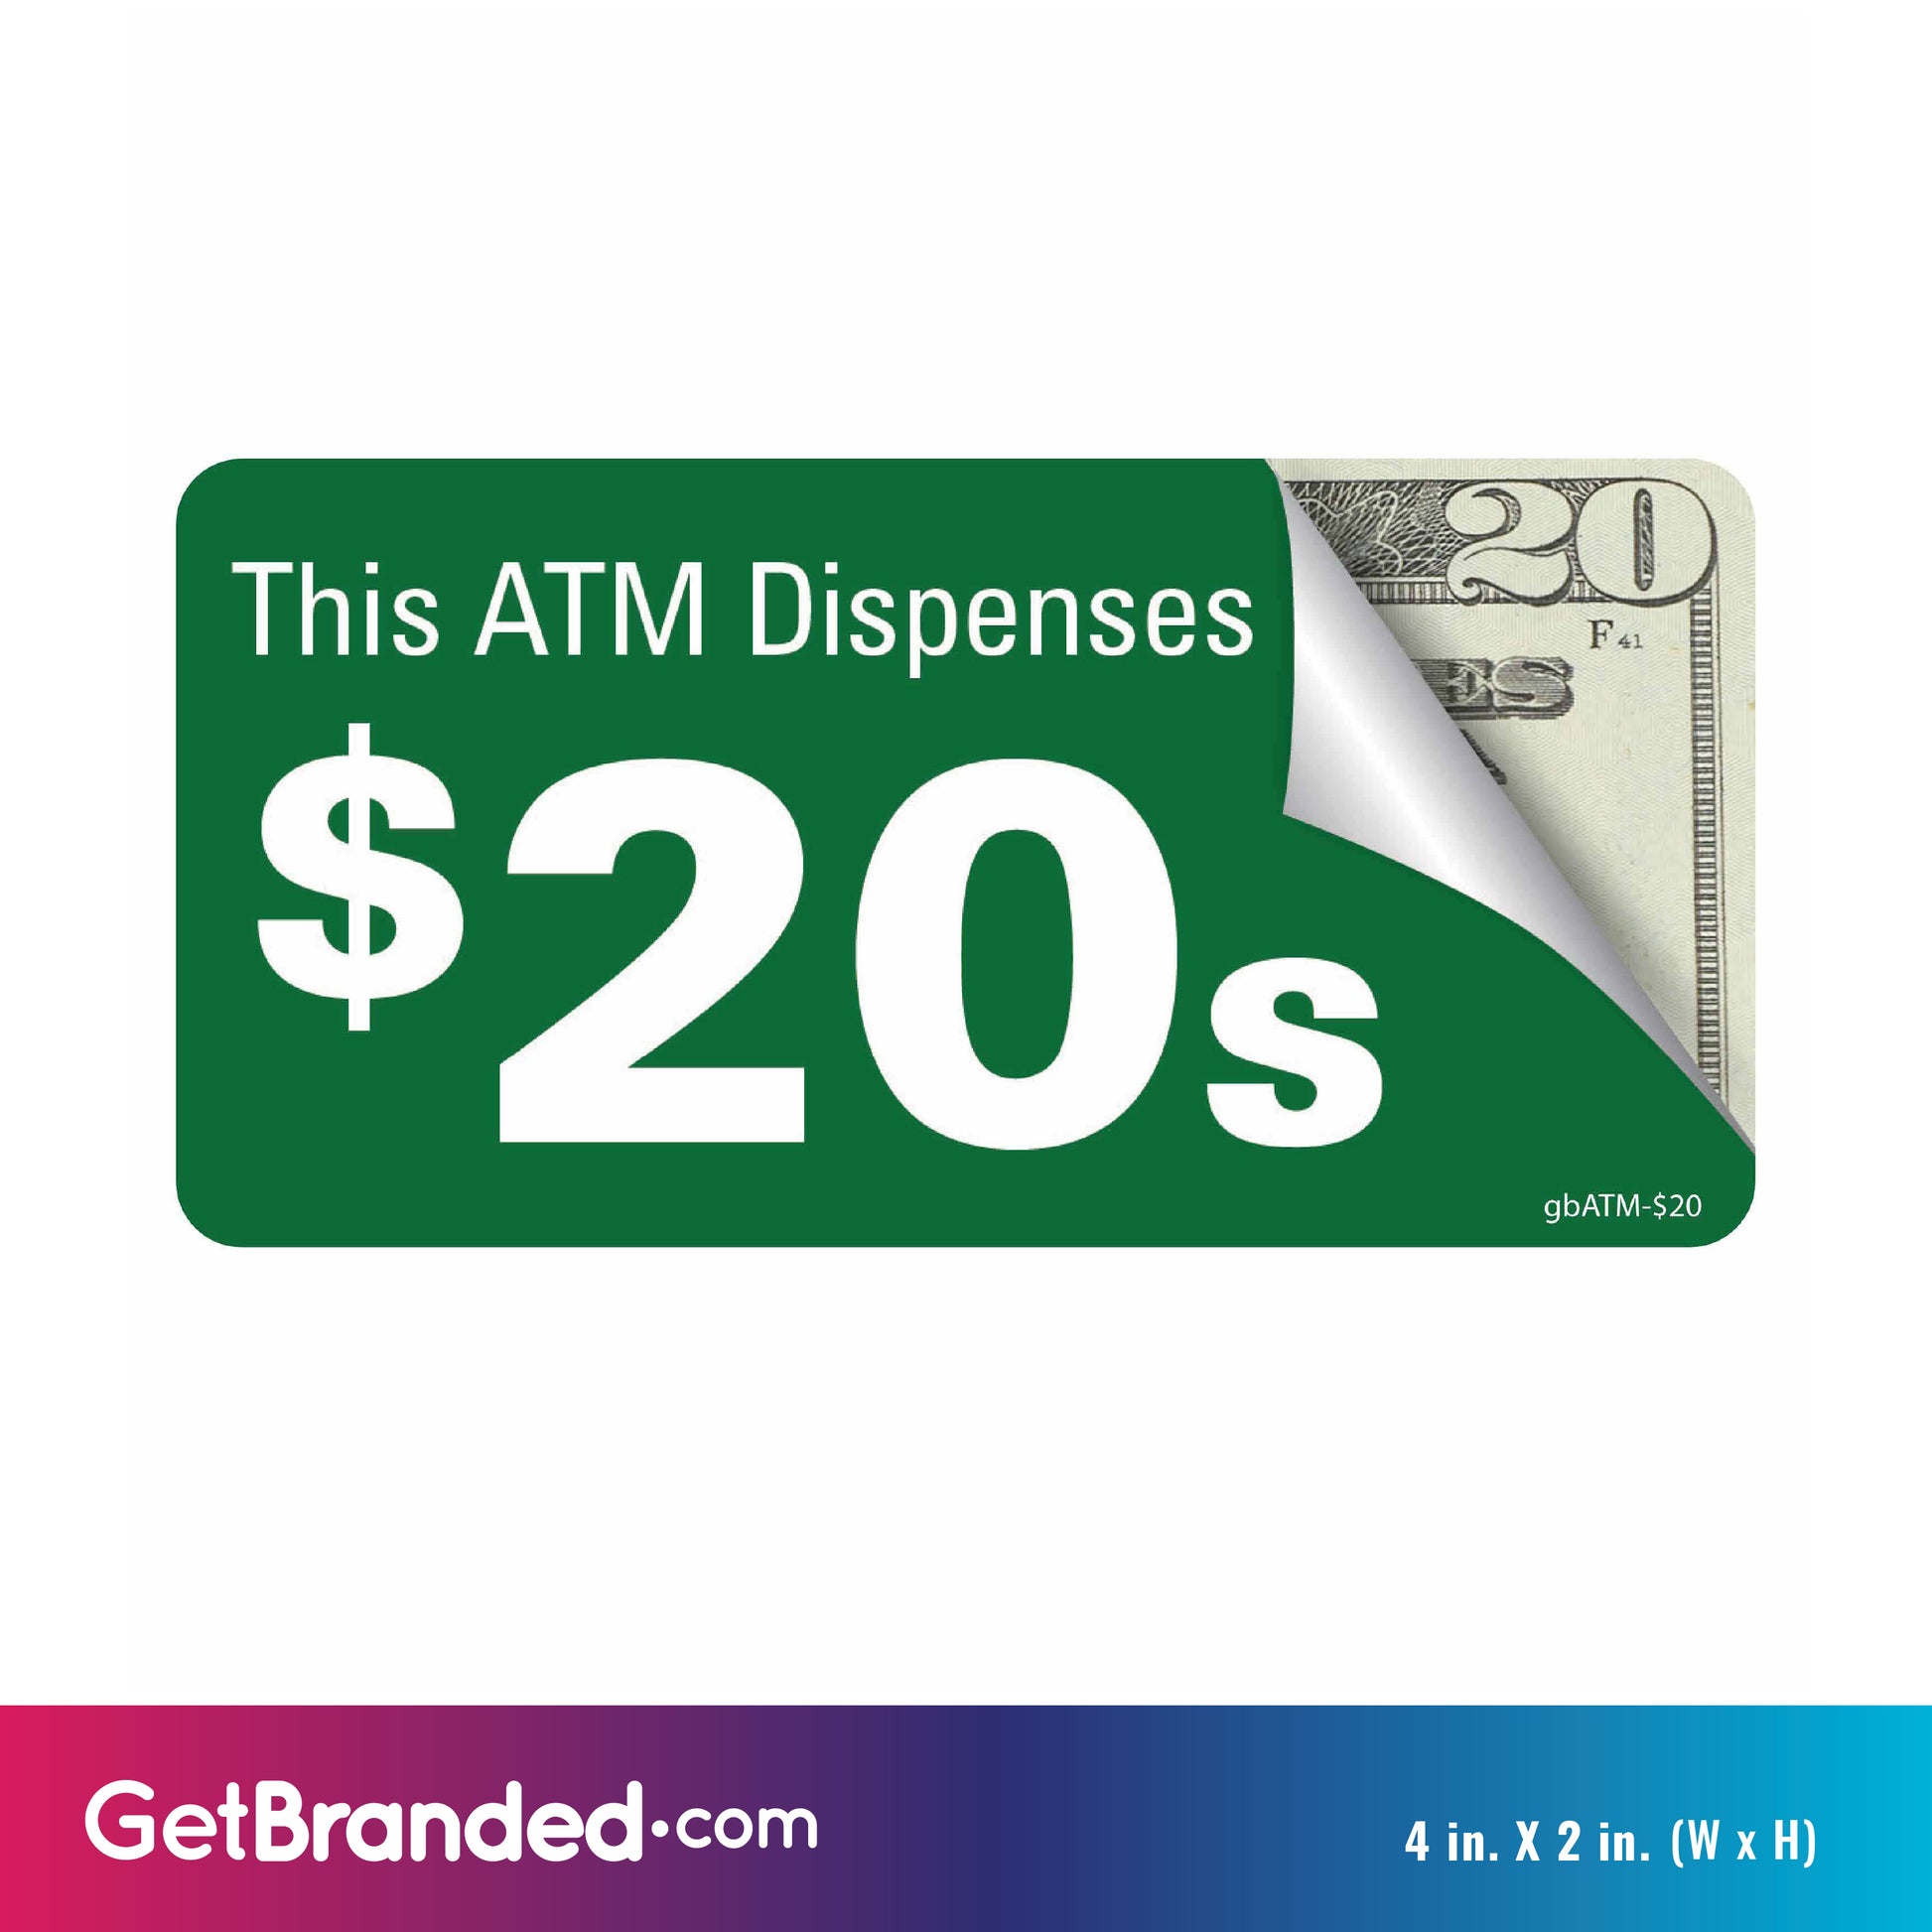 Pro ATM Dispense $20's Decal size guide. 4 inches by 2 inches in size.